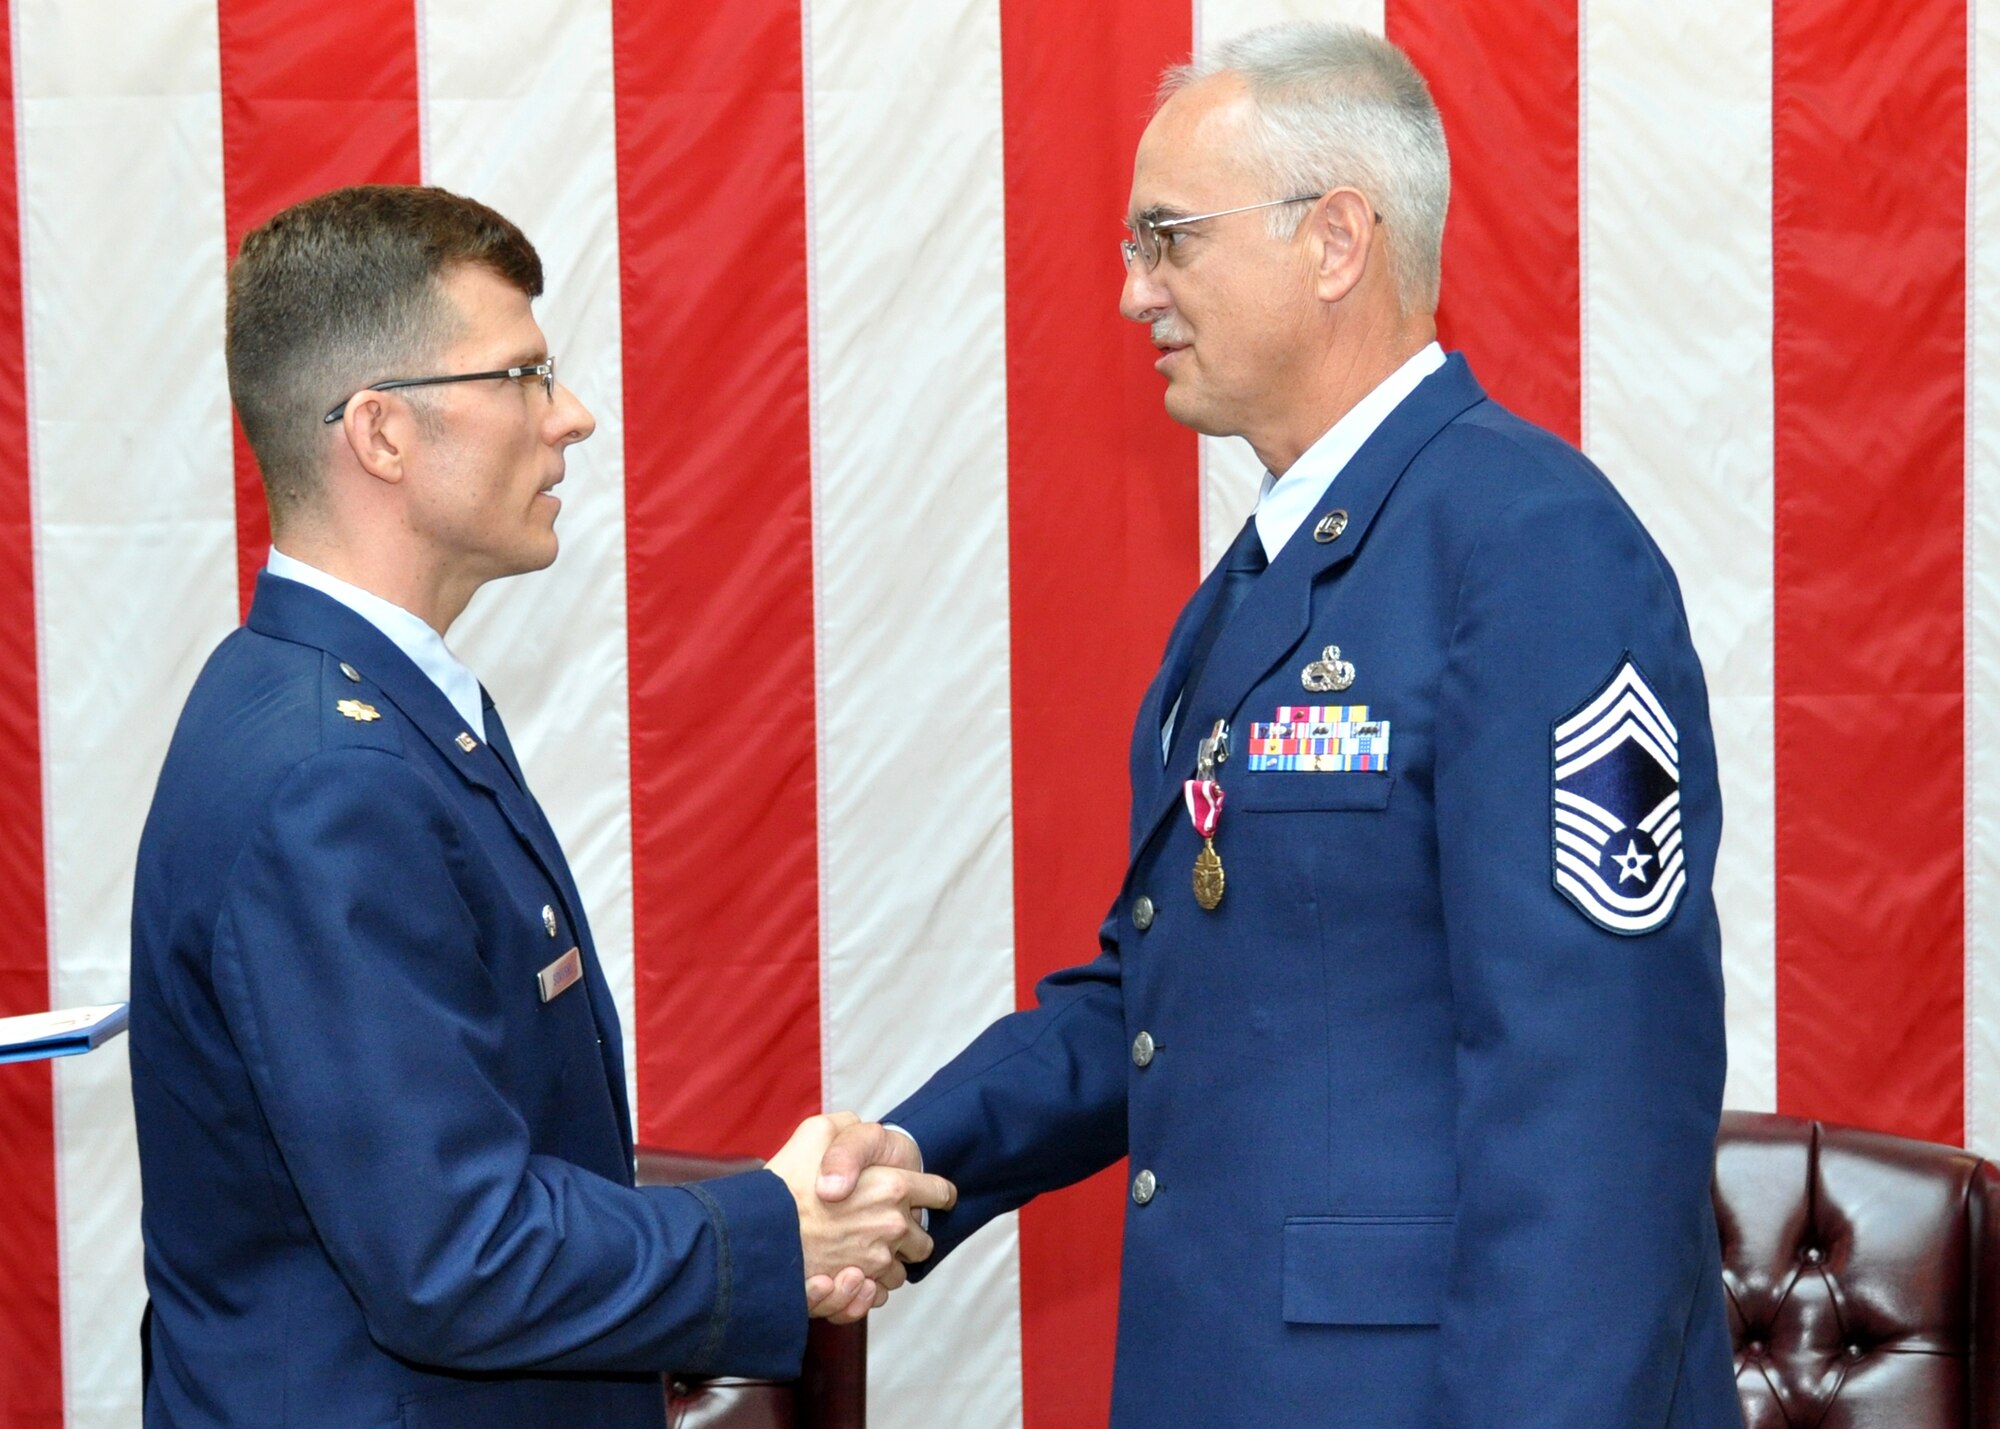 TRAVIS AIR FORCE BASE, Calif. -- Maj. Michael Savitsky, 349th AMXS commander, congratulates Chief Master Sgt. Mike Protsman, 349th AMXS superintendent, after presenting him the Meritorious Service Medal at his retirement ceremony, here B-Flight July. (U.S. Air Force photo/Master Sgt. Robert Wade)